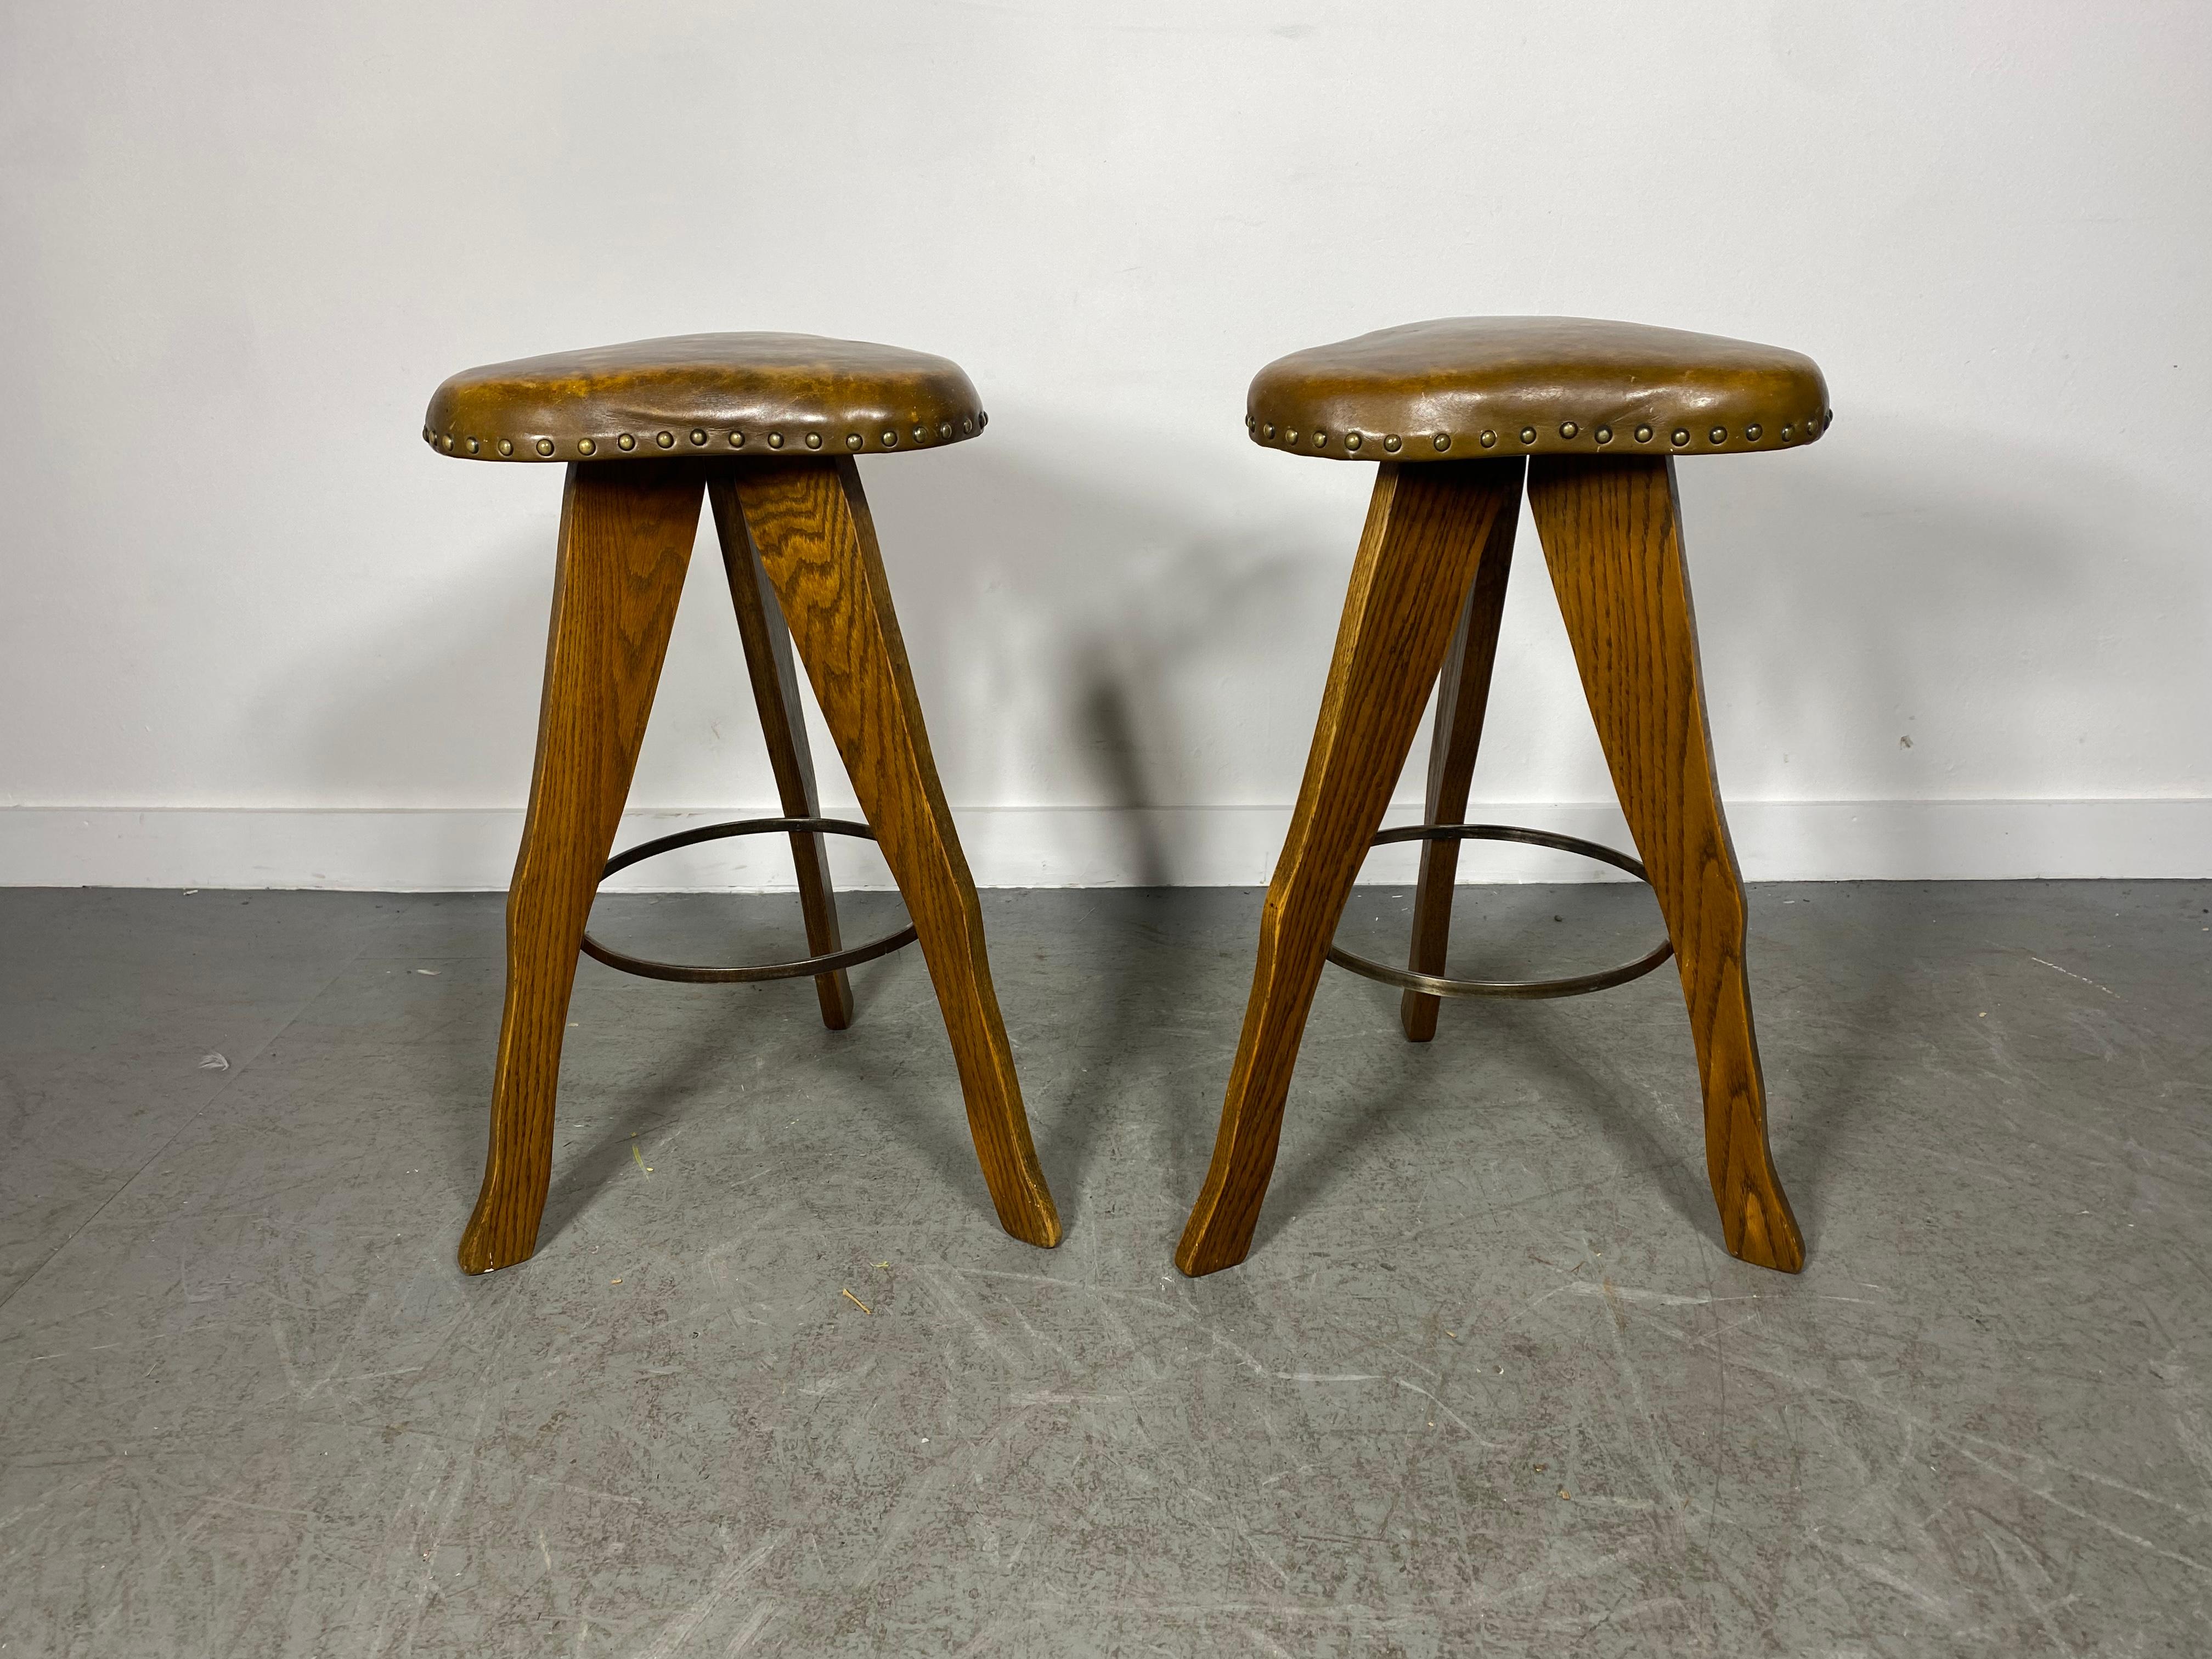 Metal Unusual Rustic / Modern Farmhouse Oak and Leather Stools, Clover Shape Tops For Sale